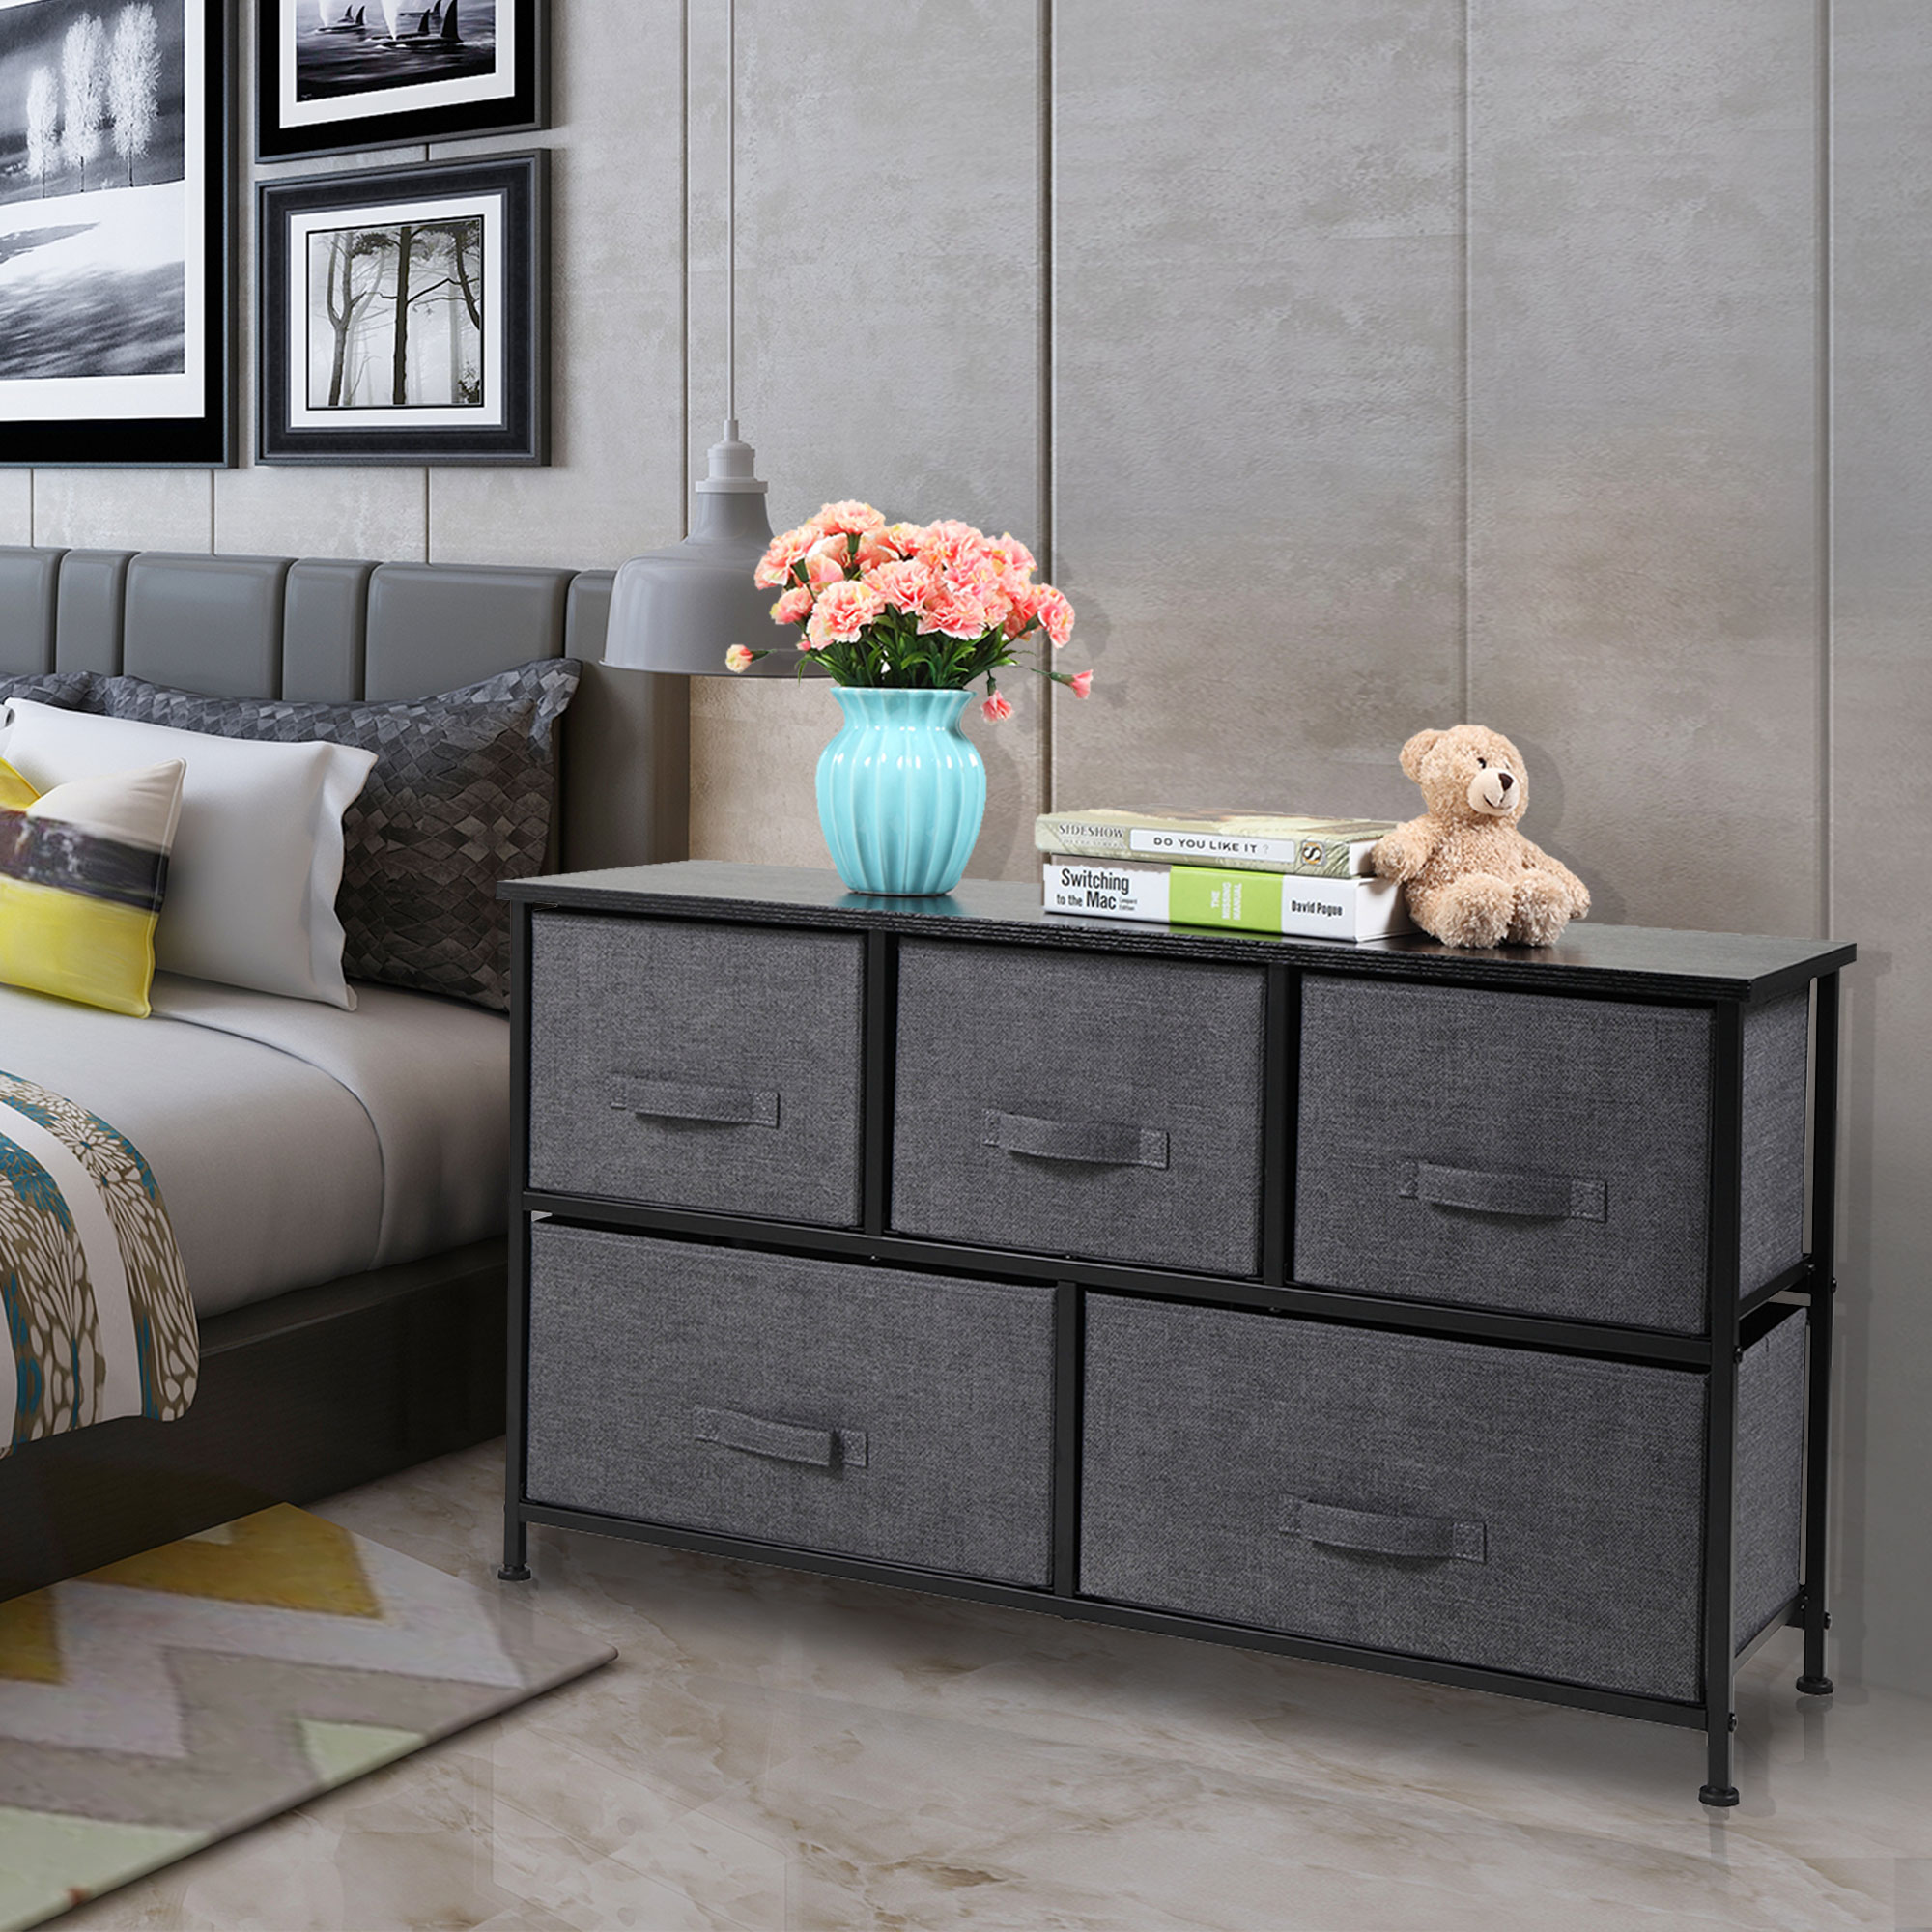 Simple and Modern Storage Chest with 5 Fabric Drawers with a Metal Frame, Living Room Bedroom Furniture - Black-CASAINC